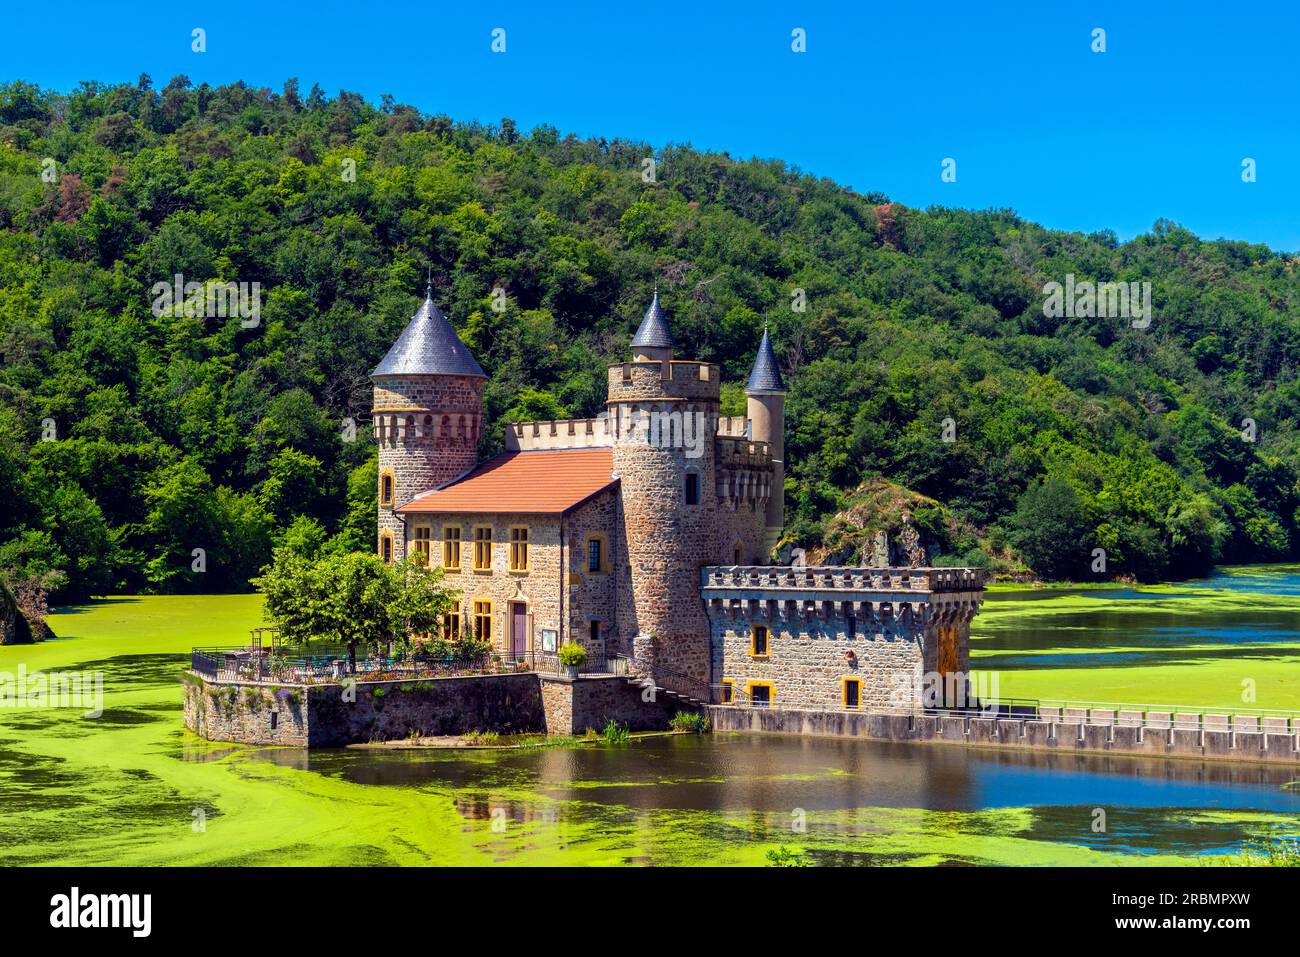 The Château Saint Priest la Roche, France. The castle is situated in the commune of Saint-Priest-la-Roche in the Loire département of France. The cast Stock Photo